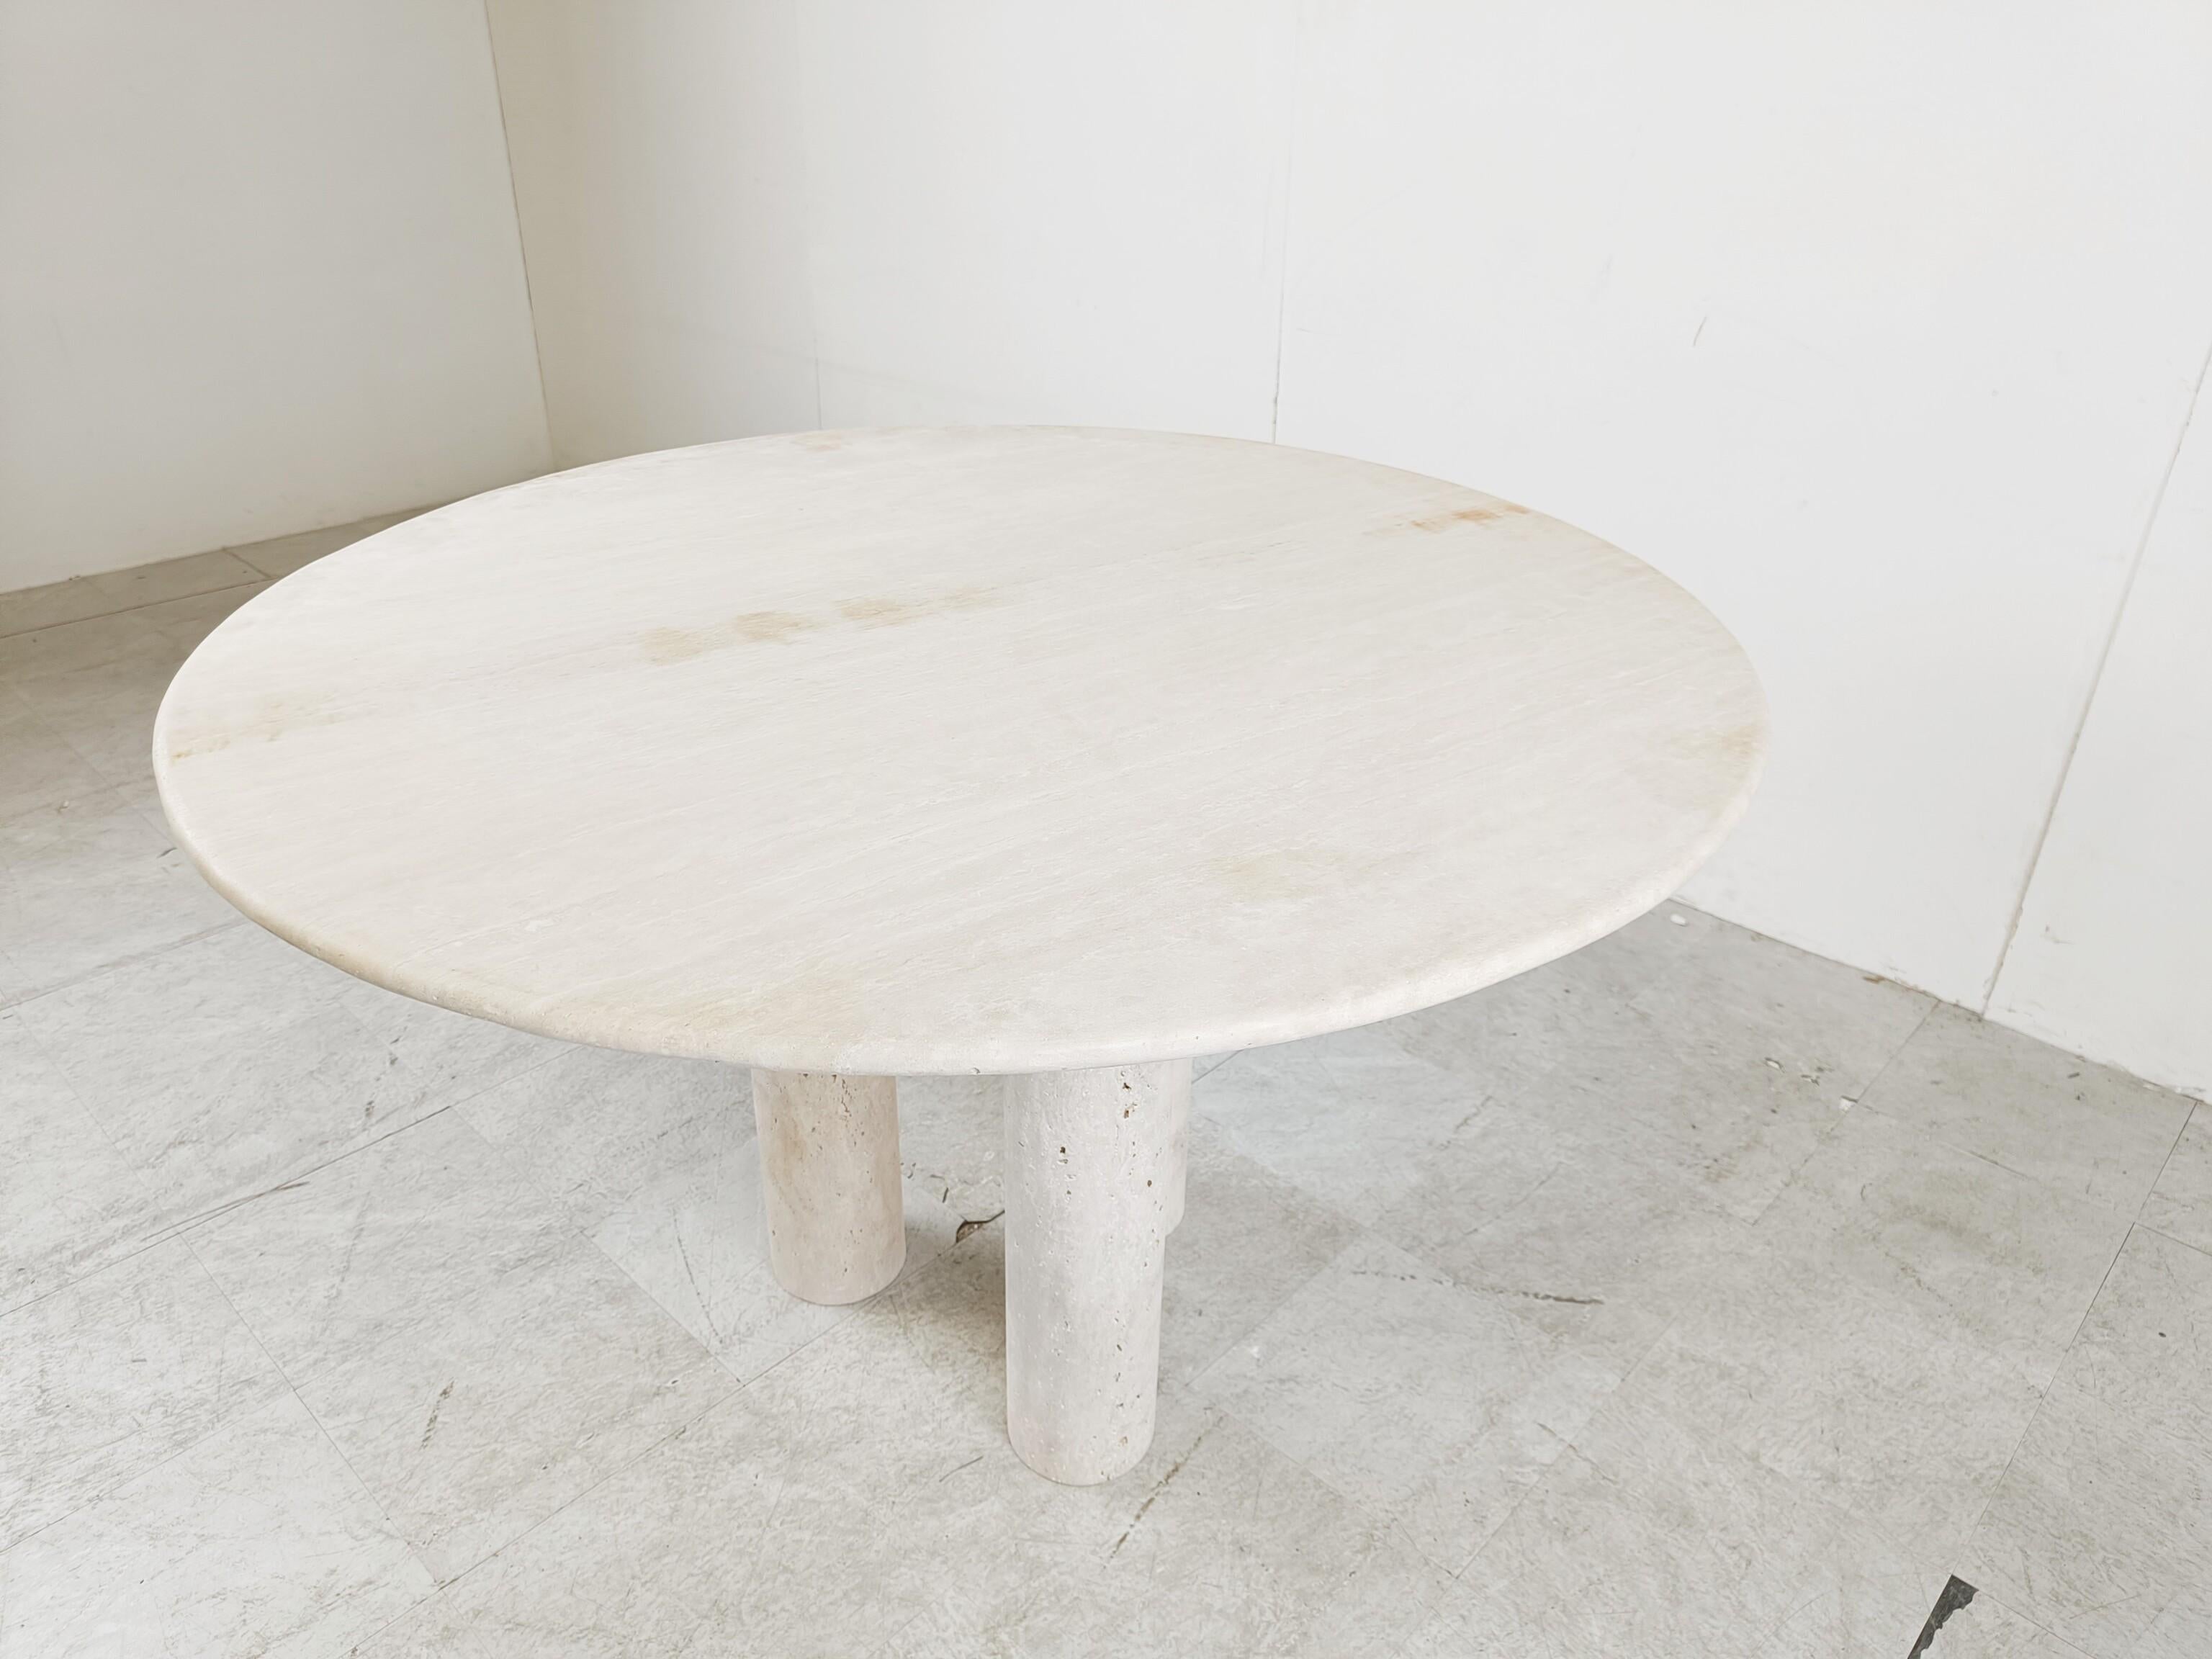 Beautiful dining table made from travertine stone with three cillindrical legs.

Good looking natural travertine stone. 

Nicely finished round top.

Good condition

1970s - Italy

Height: 74cm/29.13